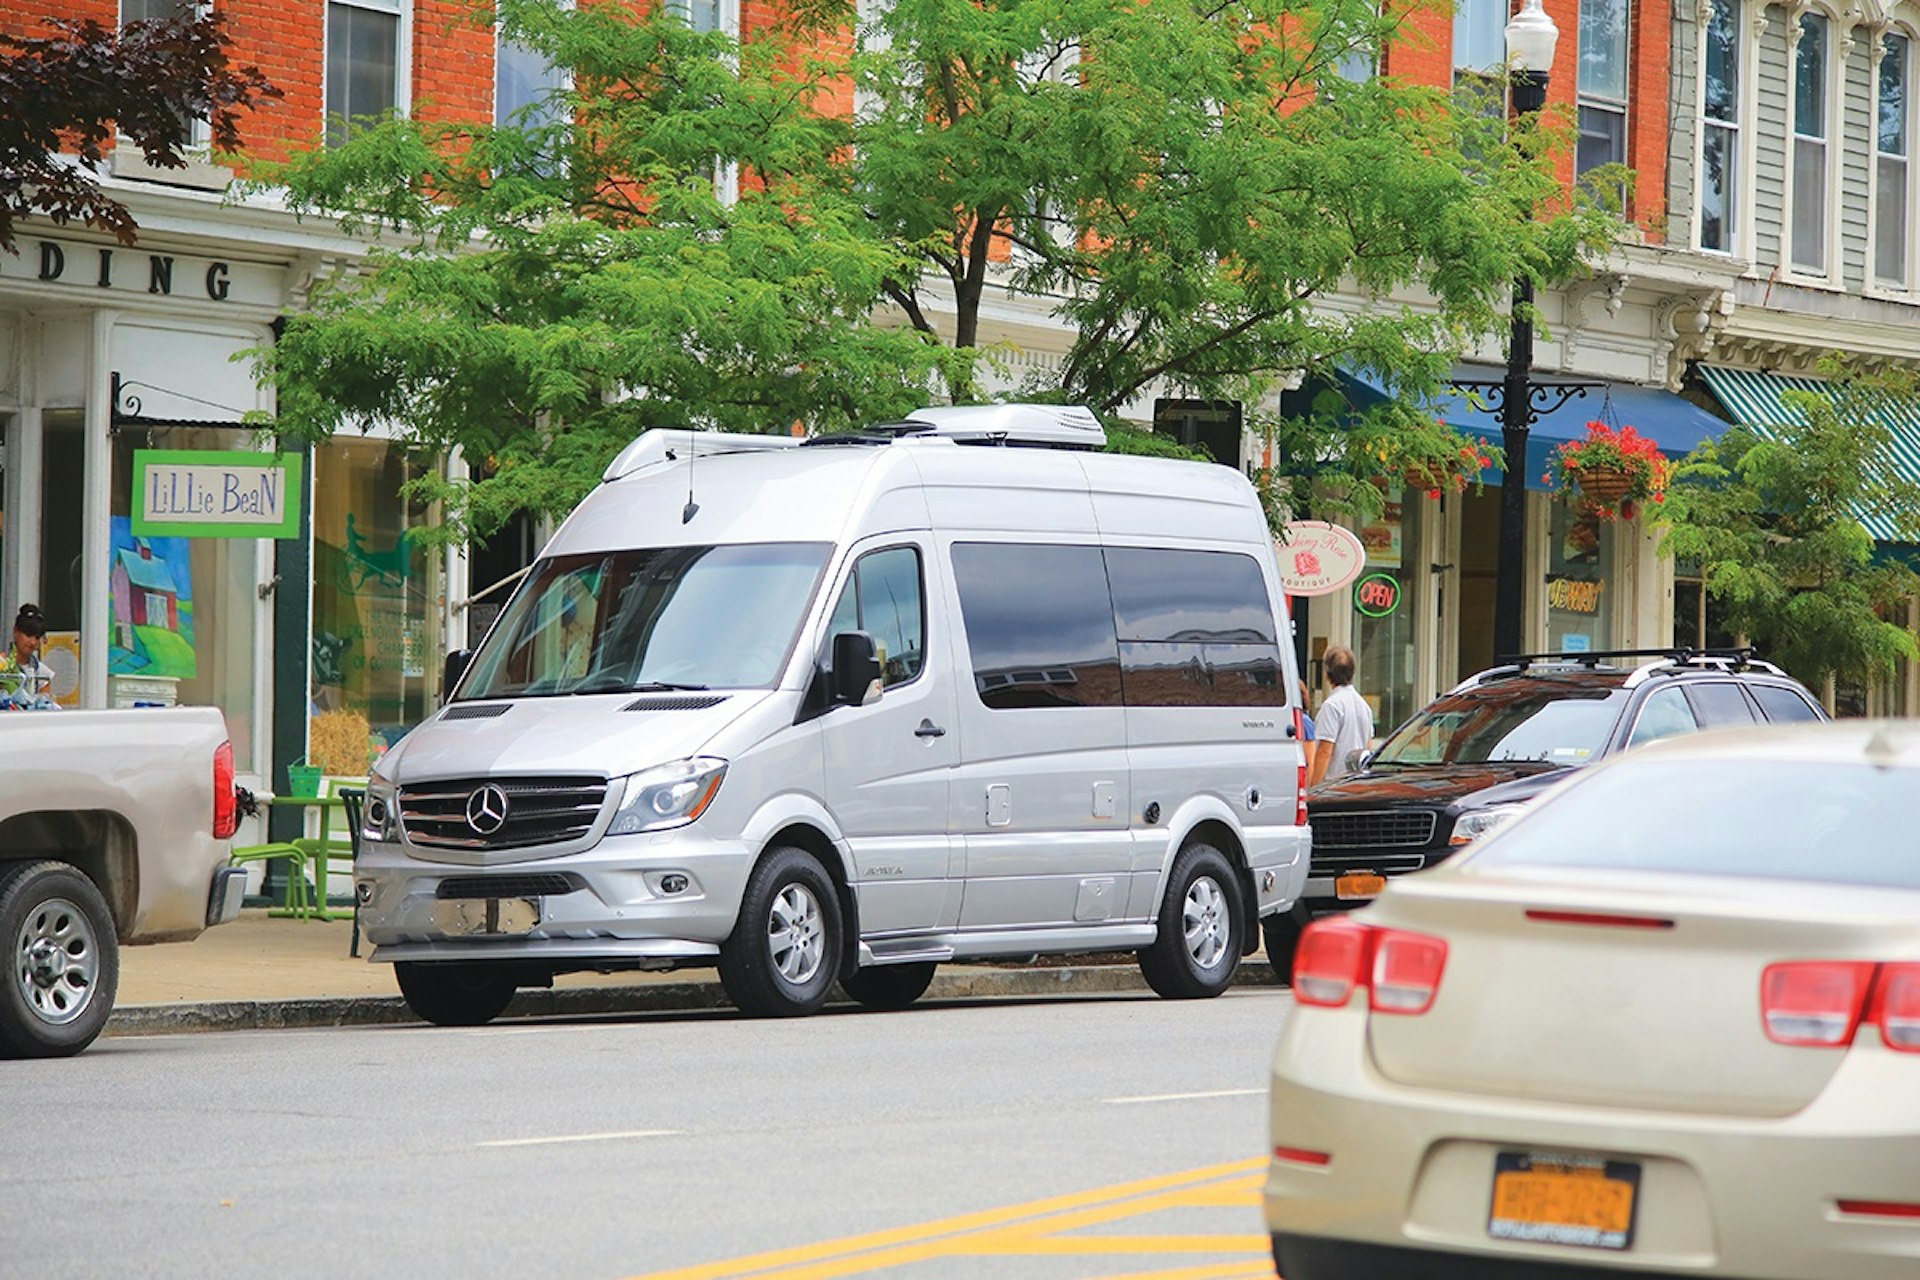 A motorhome is parked on a city street.